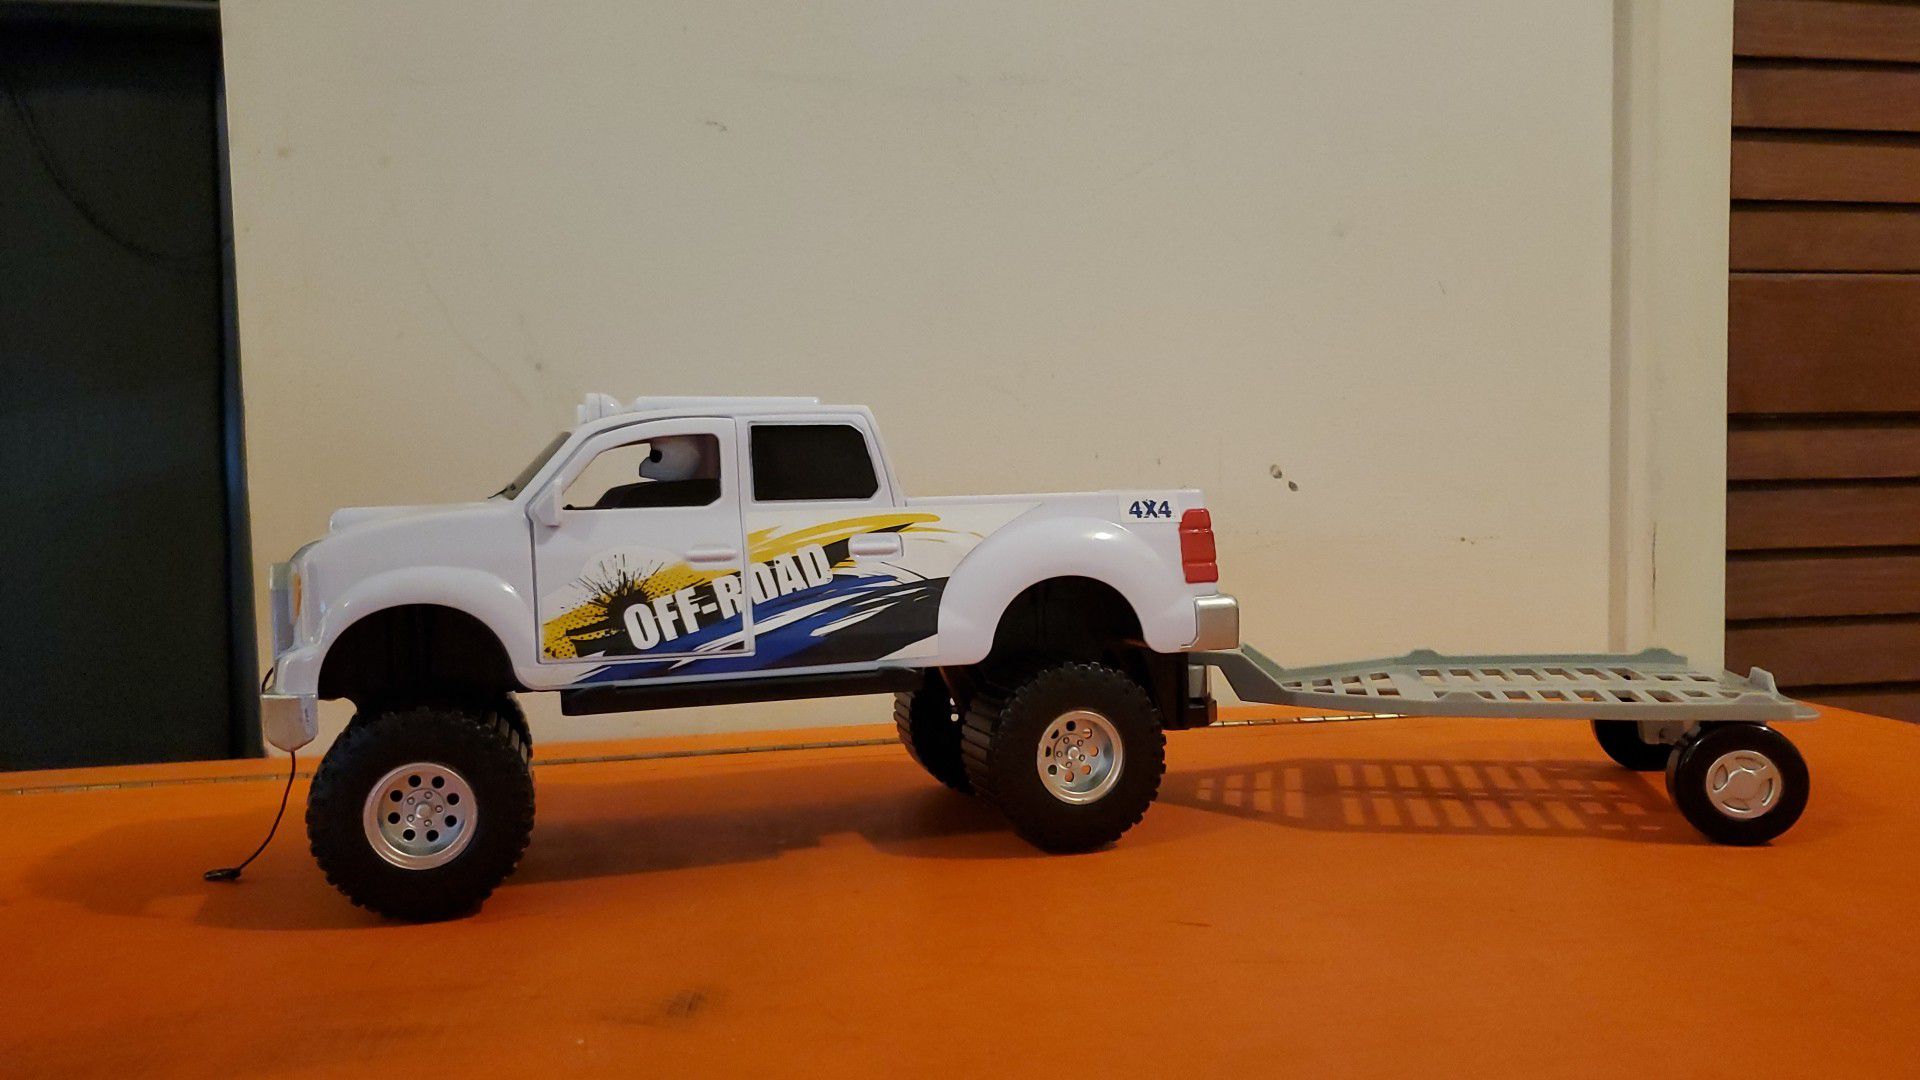 4x4 Off-Road White Truck